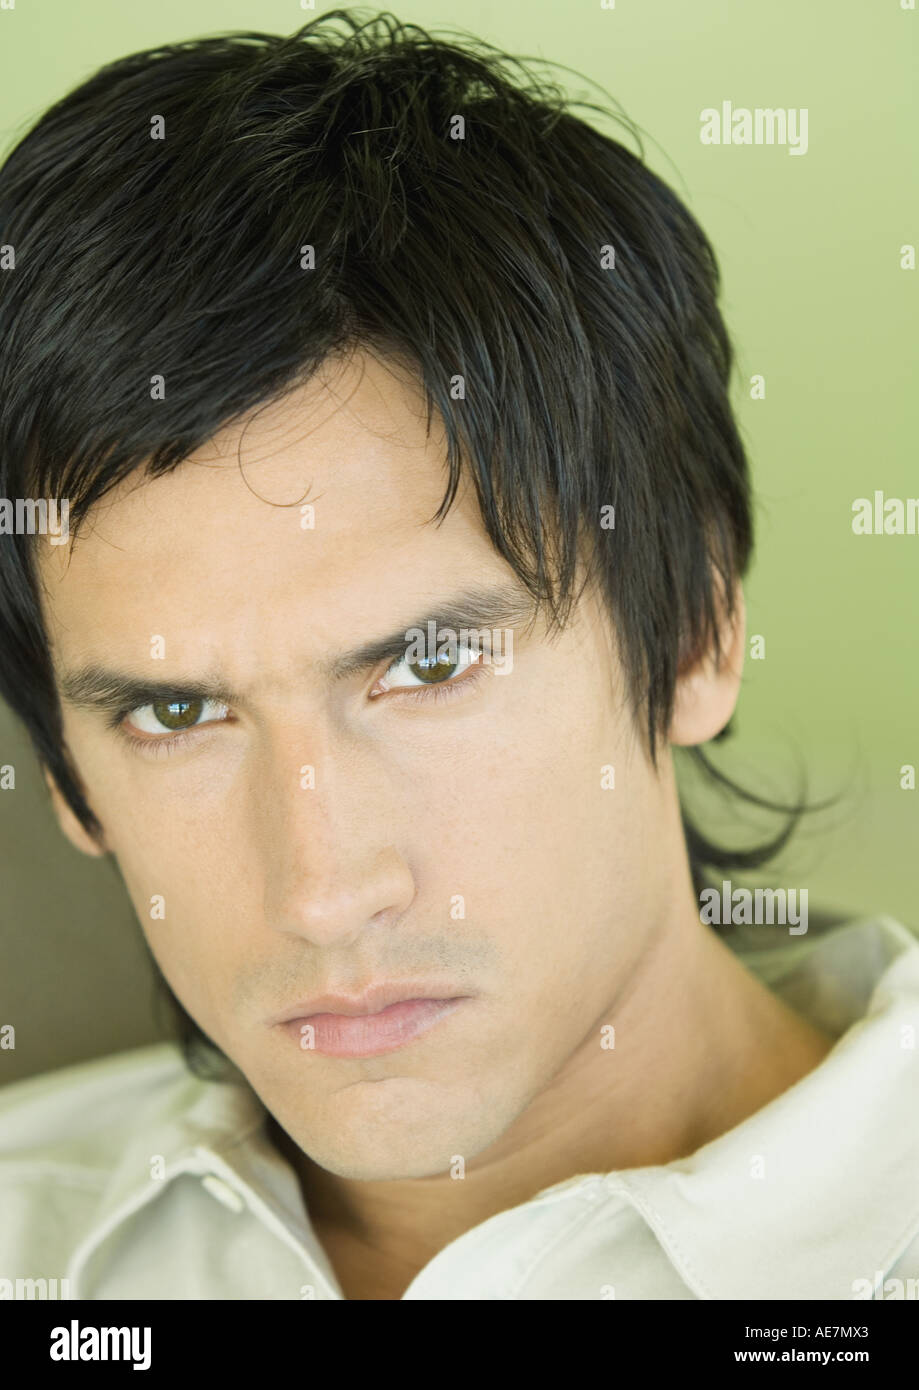 Young man frowning Stock Photo